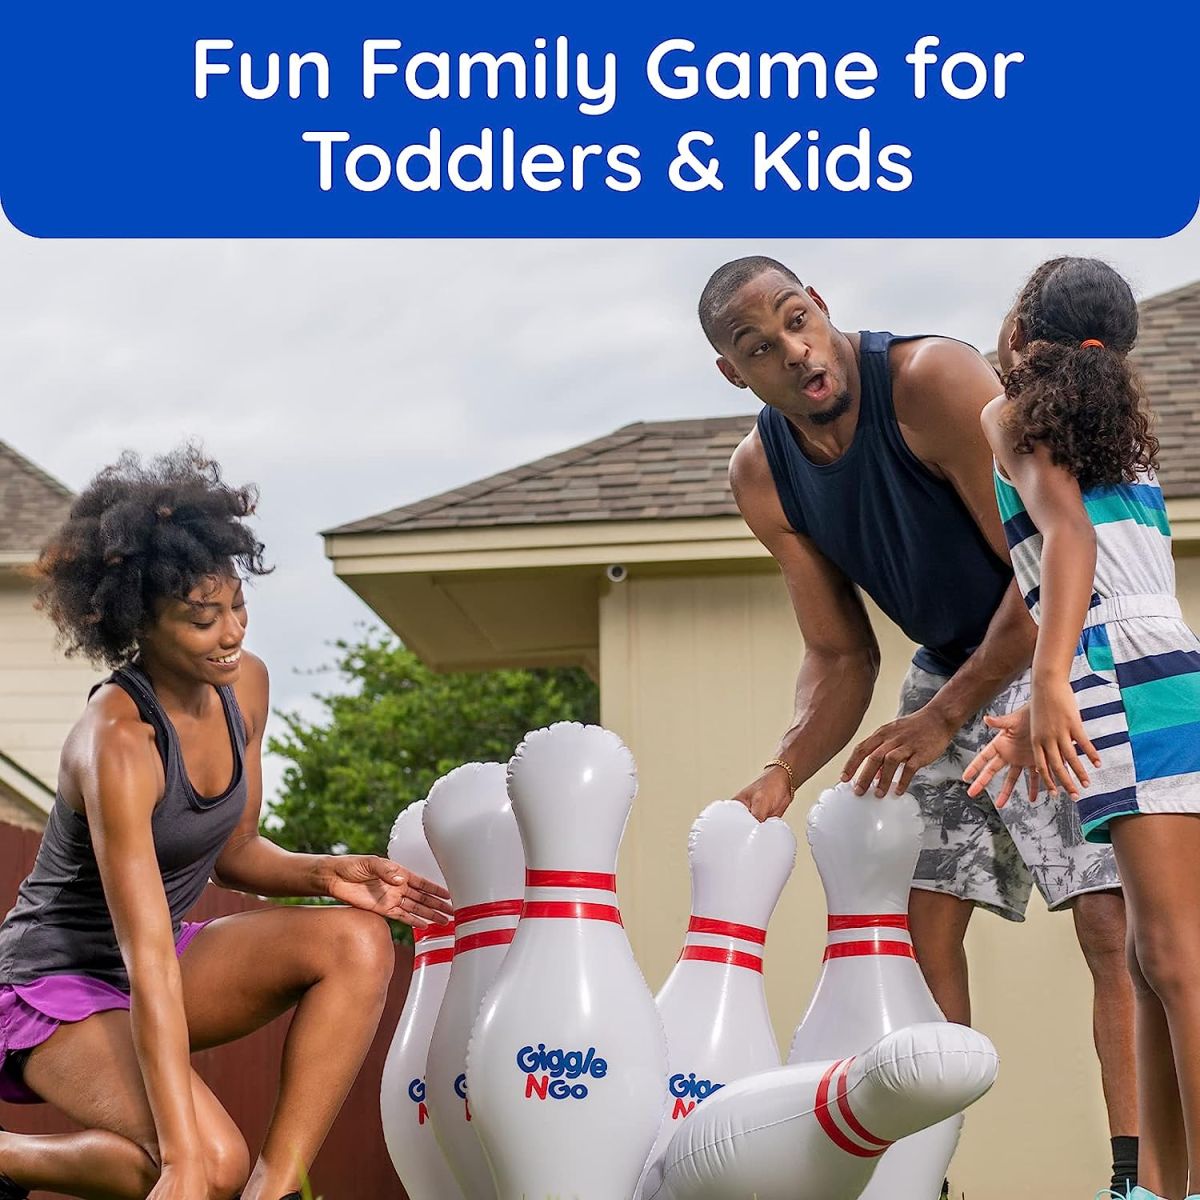 Giggle N Go Kids Bowling Set Indoor Games or Outdoor Games for Kids. Hilariously Fun Giant Yard Games for Kids and Adults. Fun Sports Games, Outside Games or Indoor Games for Kids